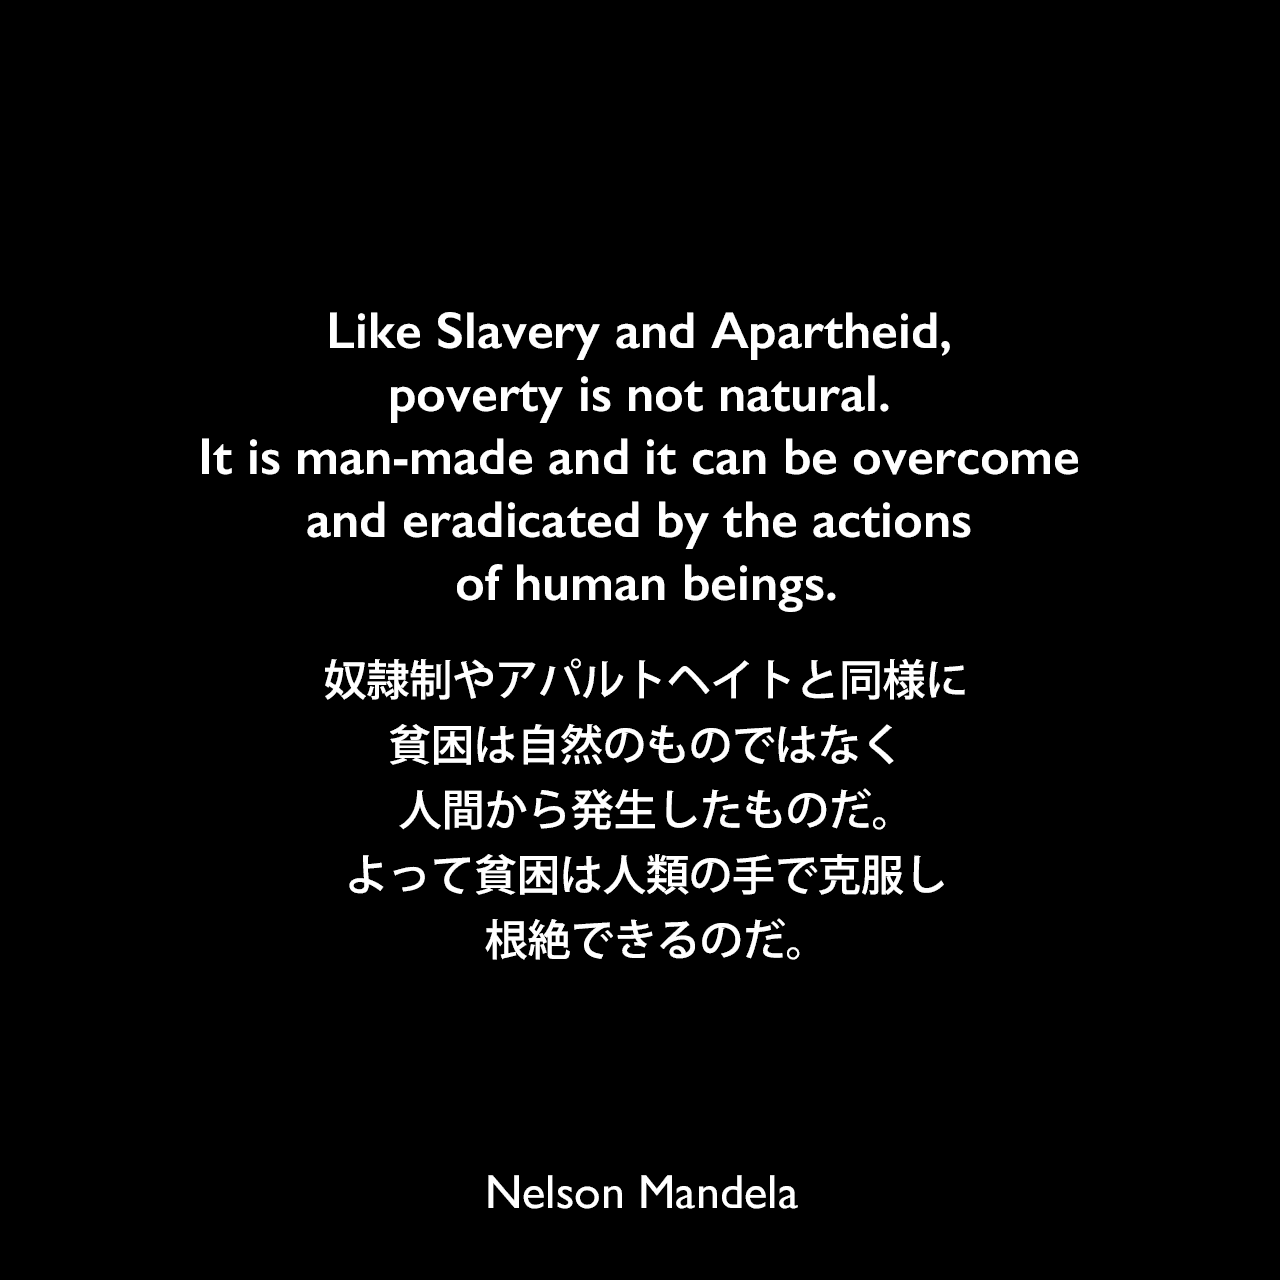 Like Slavery and Apartheid, poverty is not natural. It is man-made and it can be overcome and eradicated by the actions of human beings.奴隷制やアパルトヘイトと同様に、貧困は自然のものではなく、人間から発生したものだ。よって貧困は人類の手で克服し、根絶できるのだ。Nelson Mandela